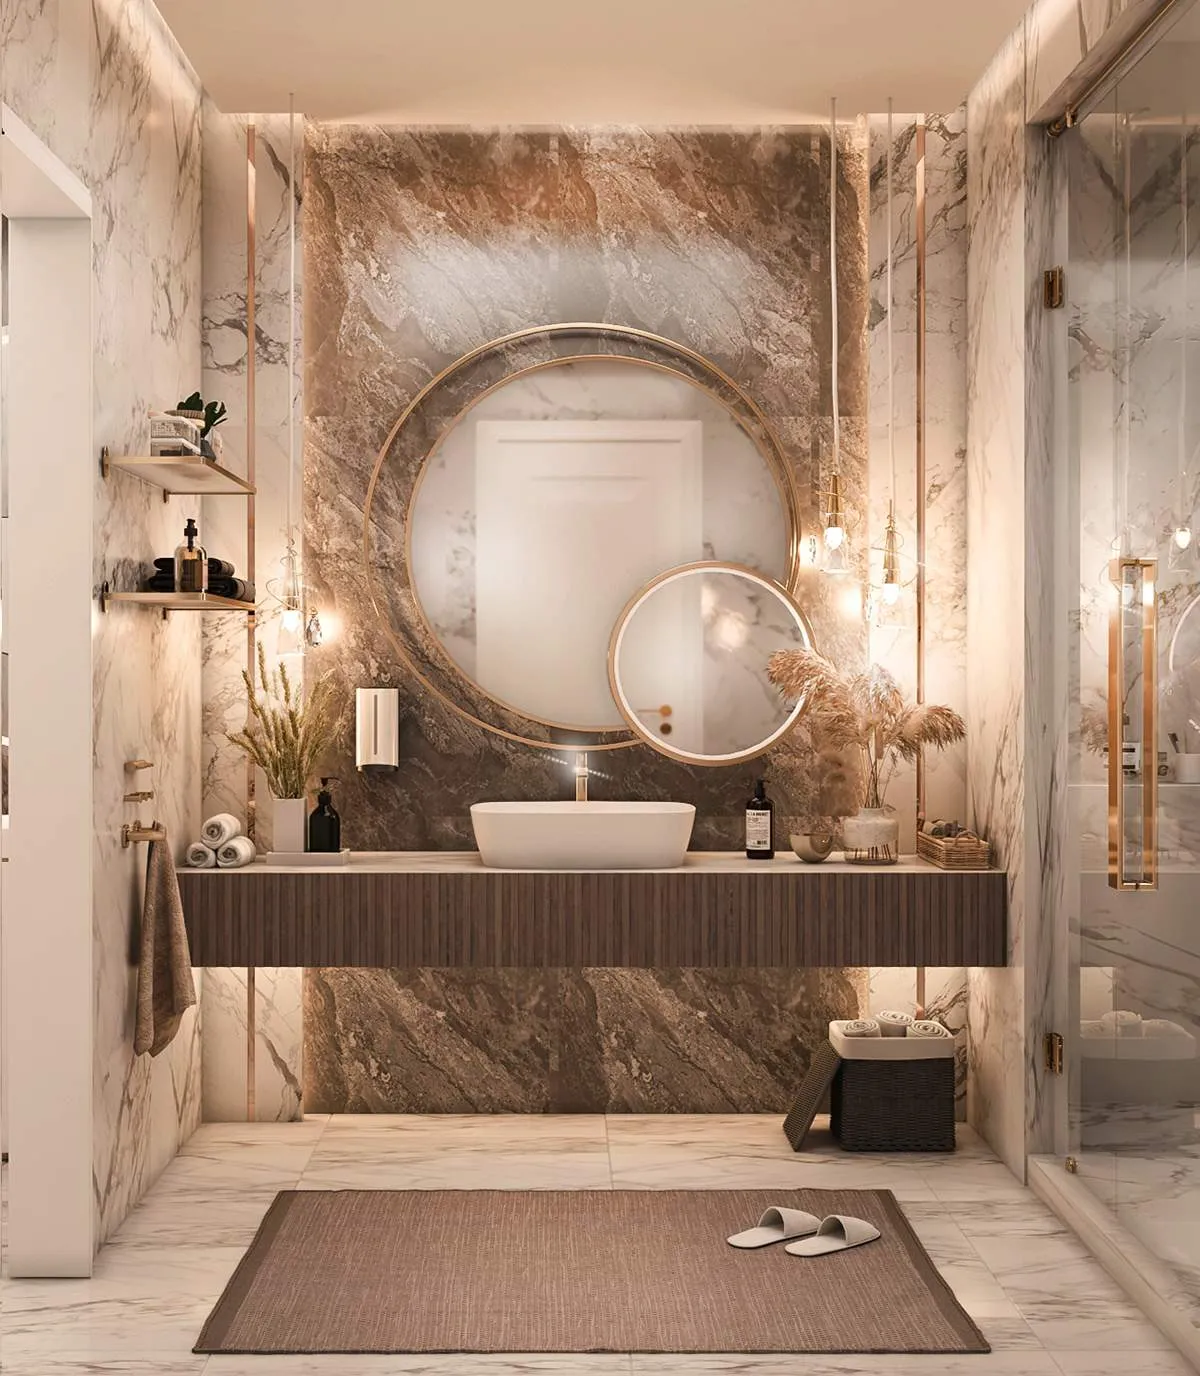 brown bathroom with warm lighting, eccentric mirrors, white washbasin, floor mat, hanging lights and a dustbin